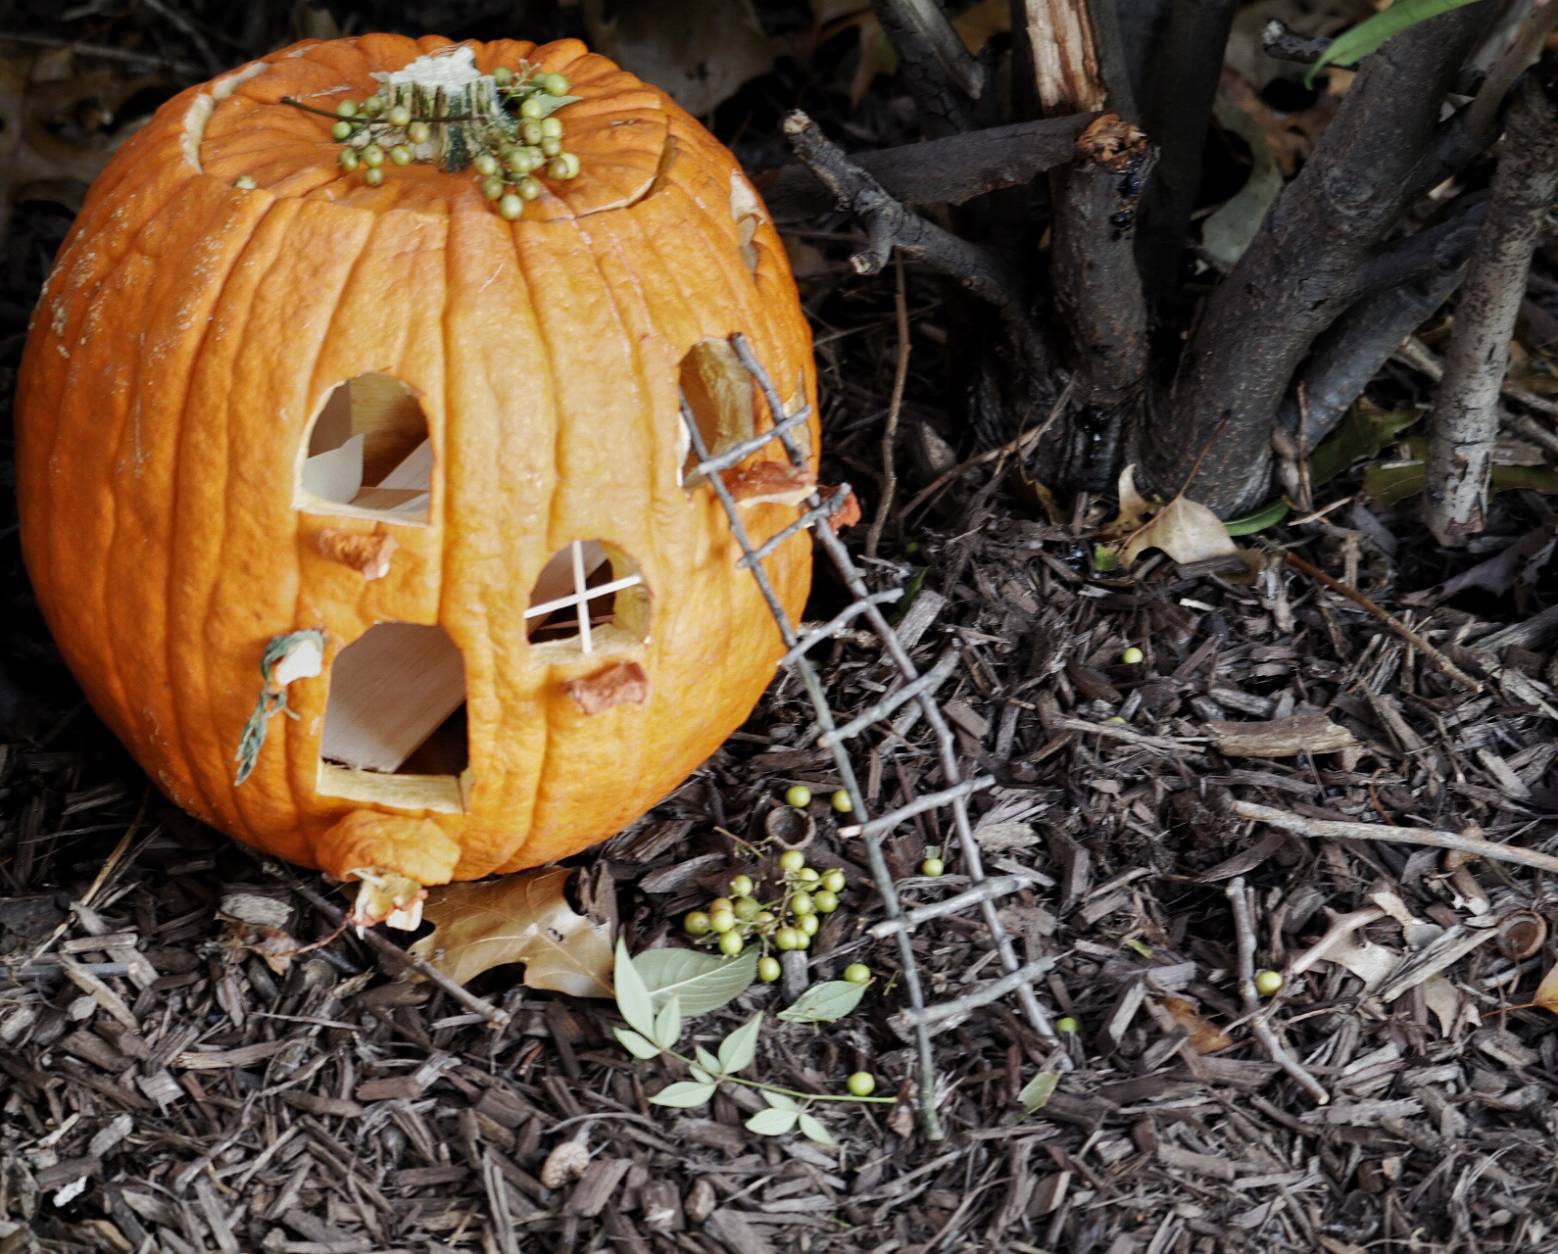 This pumpkin is the work of Scott Homolka and his 6-year-old daughter, Eloie. (WTOP/Kate Ryan)